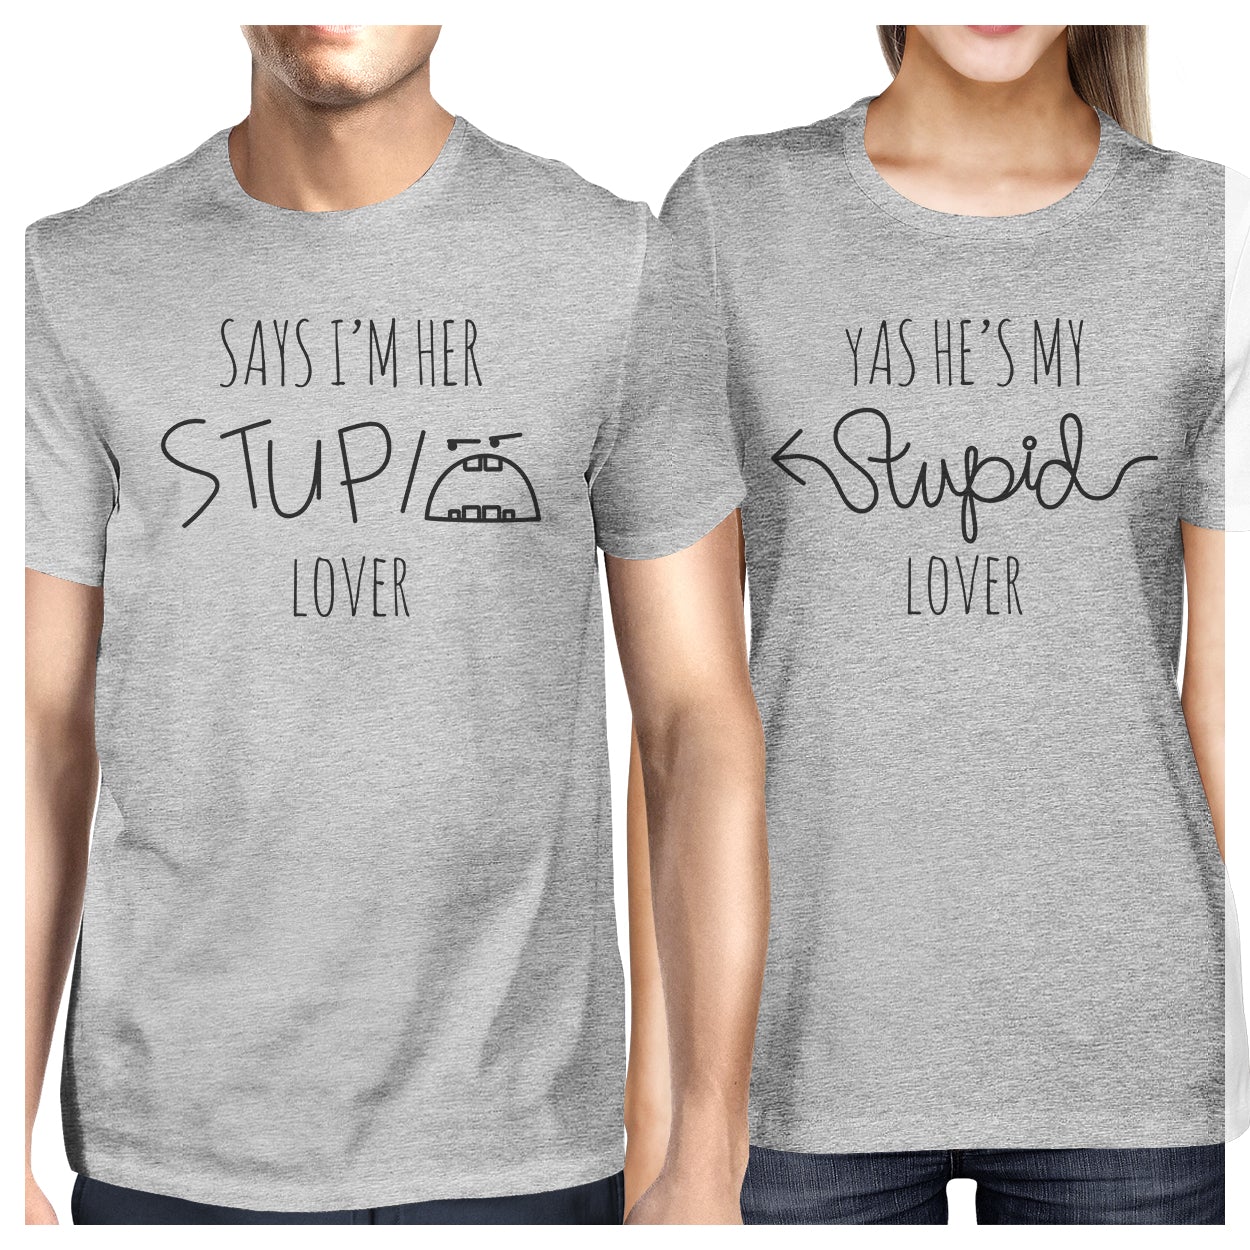 Her Stupid Lover And My Stupid Lover Matching Couple Grey Shirts